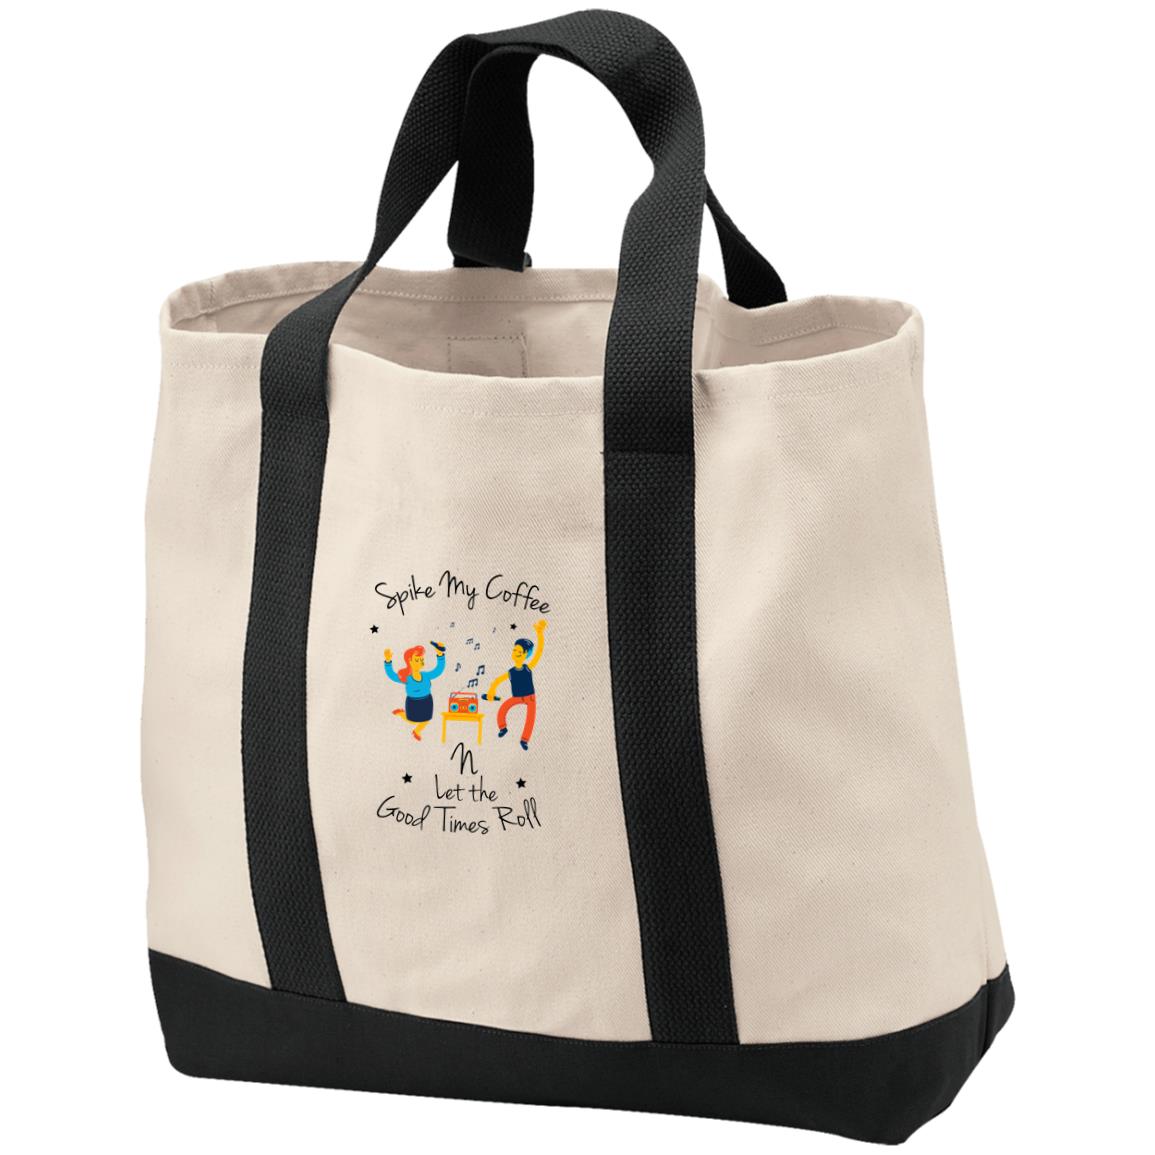 Sppike My Coffee  2-Tone Shopping Tote